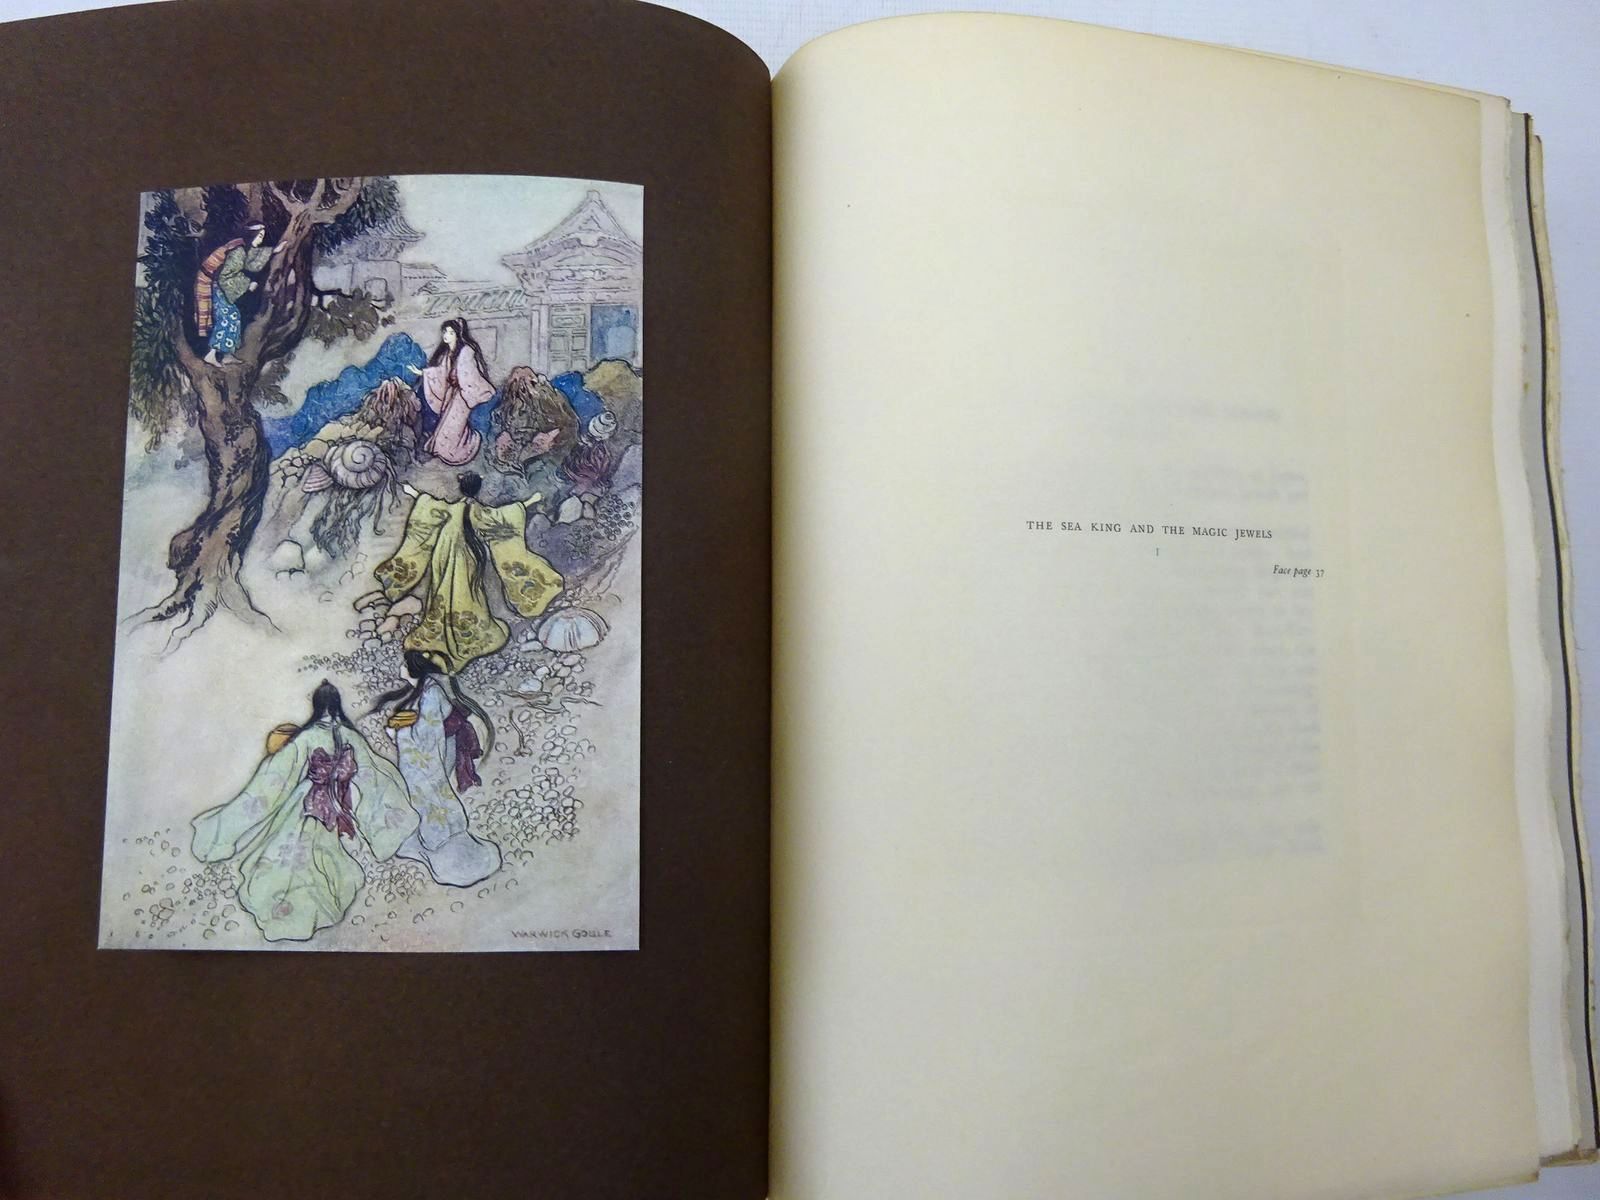 Photo of GREEN WILLOW AND OTHER JAPANESE FAIRY TALES written by James, Grace illustrated by Goble, Warwick published by Macmillan & Co. Ltd. (STOCK CODE: 2126689)  for sale by Stella & Rose's Books